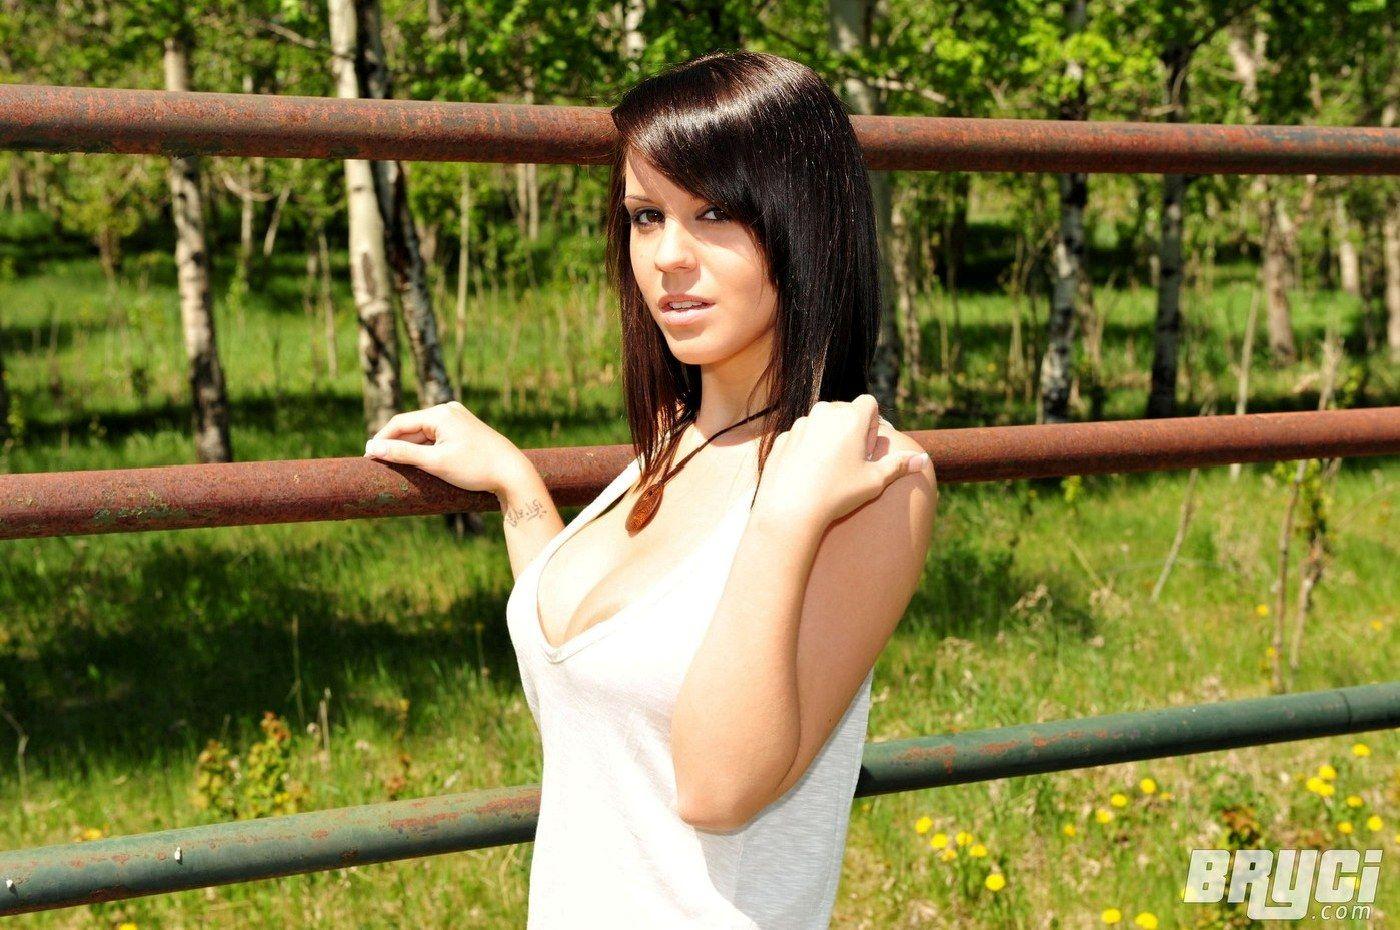 Pictures of Bryci flashing on a farm #53578444